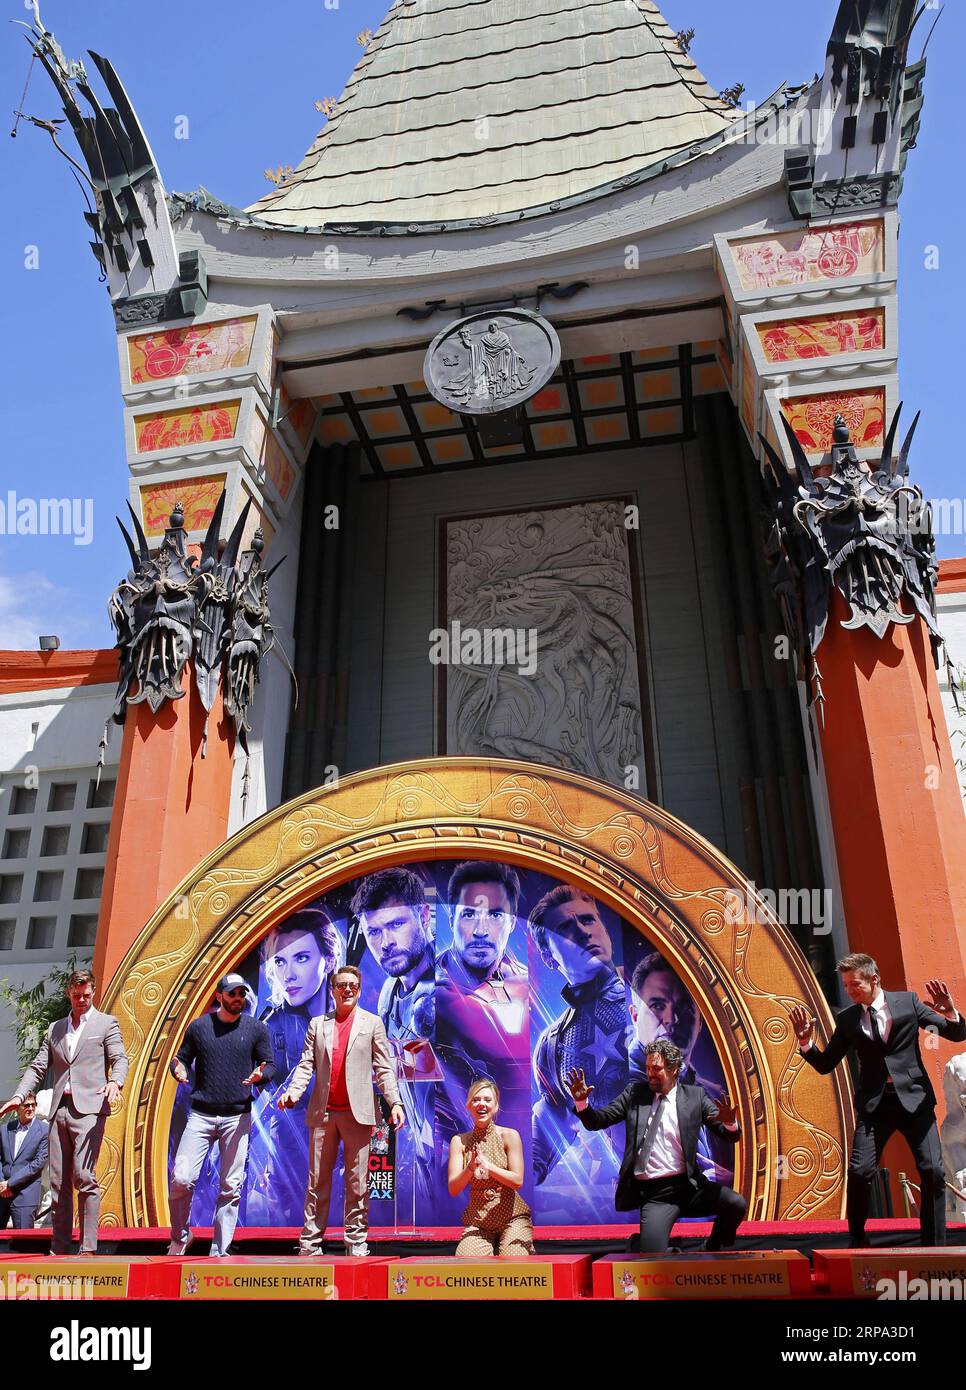 (190424) -- LOS ANGELES, April 24, 2019 (Xinhua) -- Actors Chris Hemsworth, Chris Evans, Robert Downey Jr., actress Scarlett Johansson, actors Mark Ruffalo, Jeremy Renner (From L to R) attend their print ceremony in the forecourt of the TCL Chinese Theater in Los Angeles, the United States, April 23, 2019. The cast of Marvel Studios Avengers: Endgame including Robert Downey Jr., Chris Evans, Mark Ruffalo, Chris Hemsworth, Scarlett Johansson, and Jeremy Renner, along with Marvel Studios President Kevin Feige, received one of Hollywood s oldest accolades this Tuesday, to sign their names and put Stock Photo